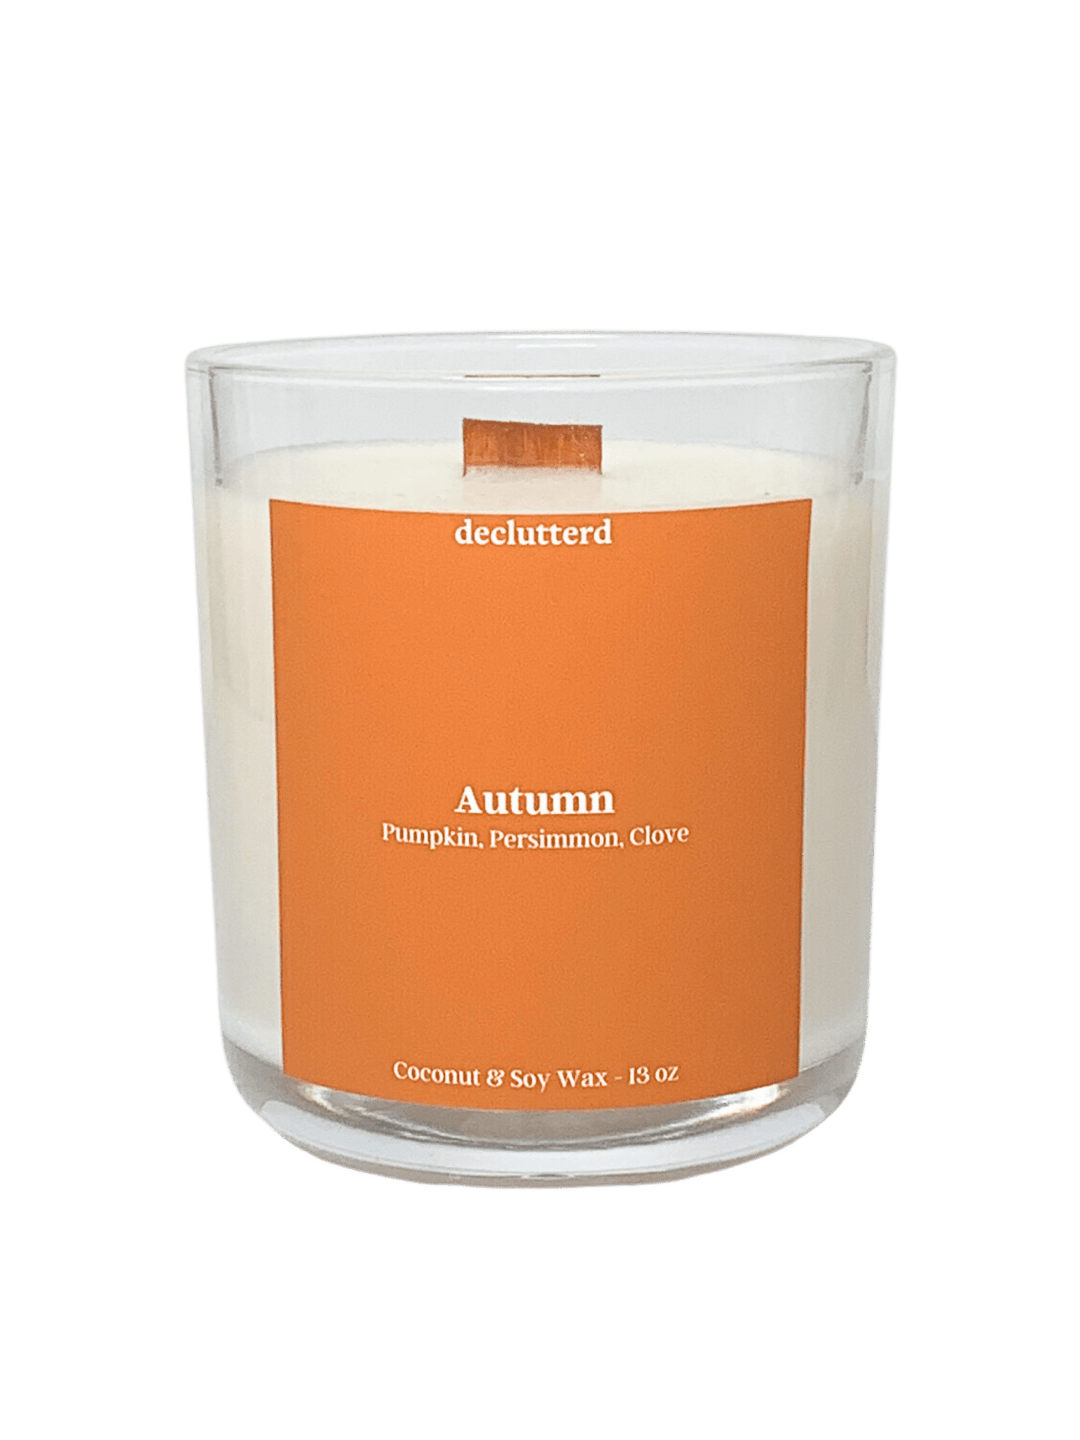 autumn wood wick candle, front